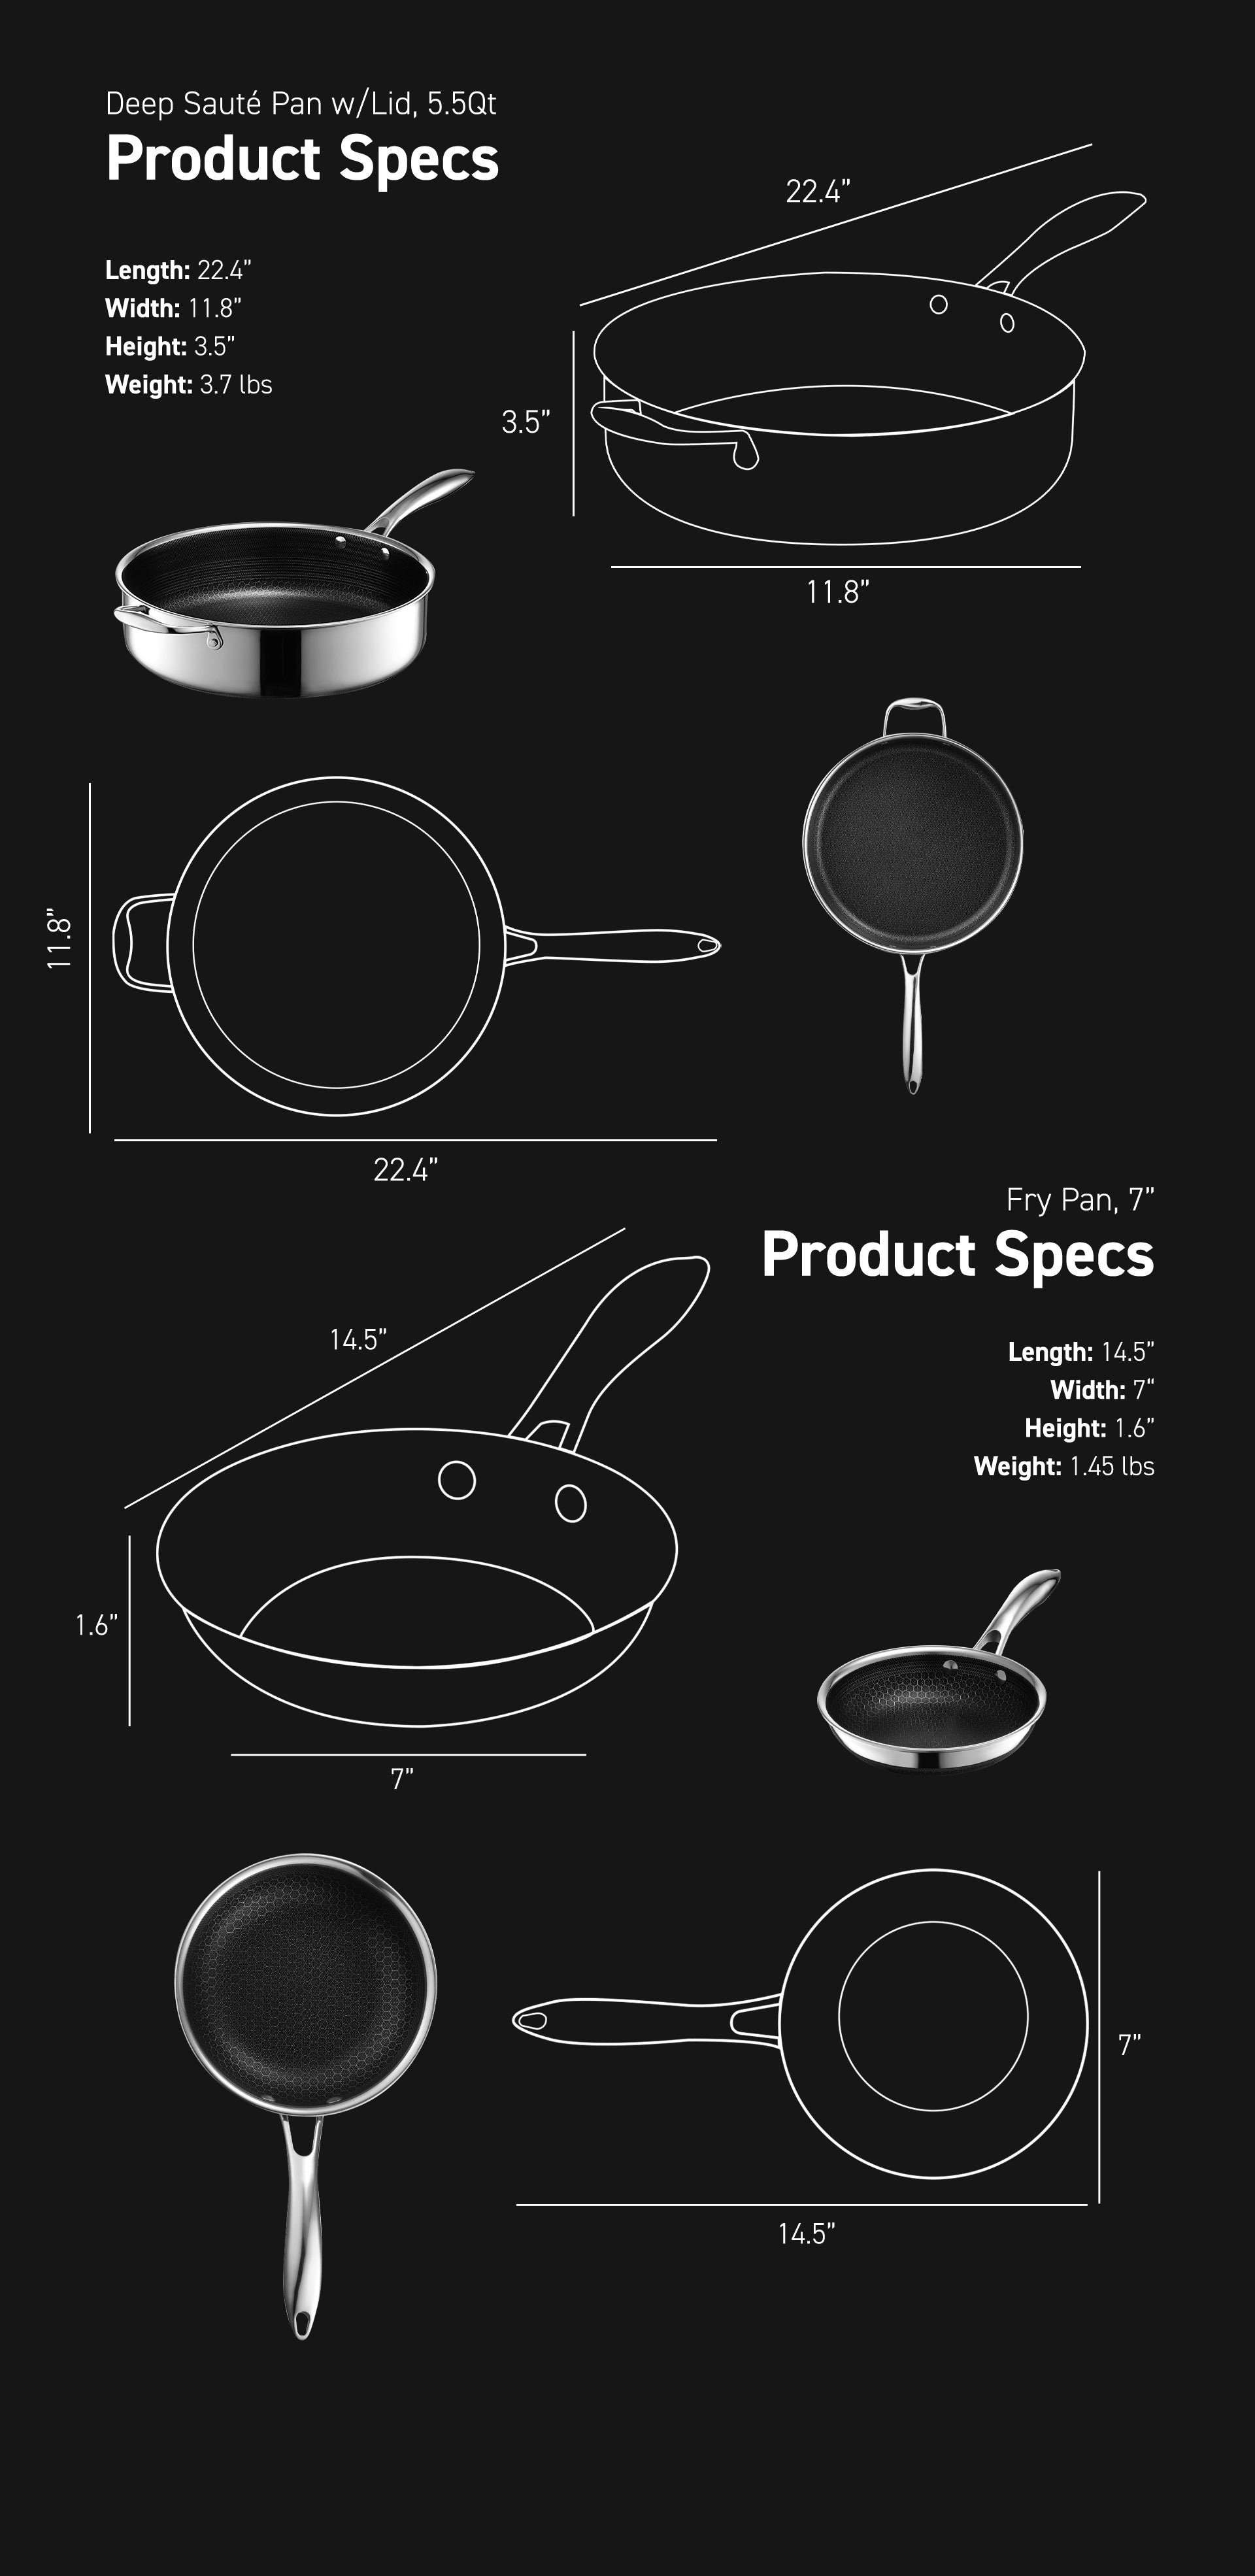 HexClad - We go deep! #BigPanEnergy Have you made our new 7QT Hybrid Saute  Pan part of your collection yet?